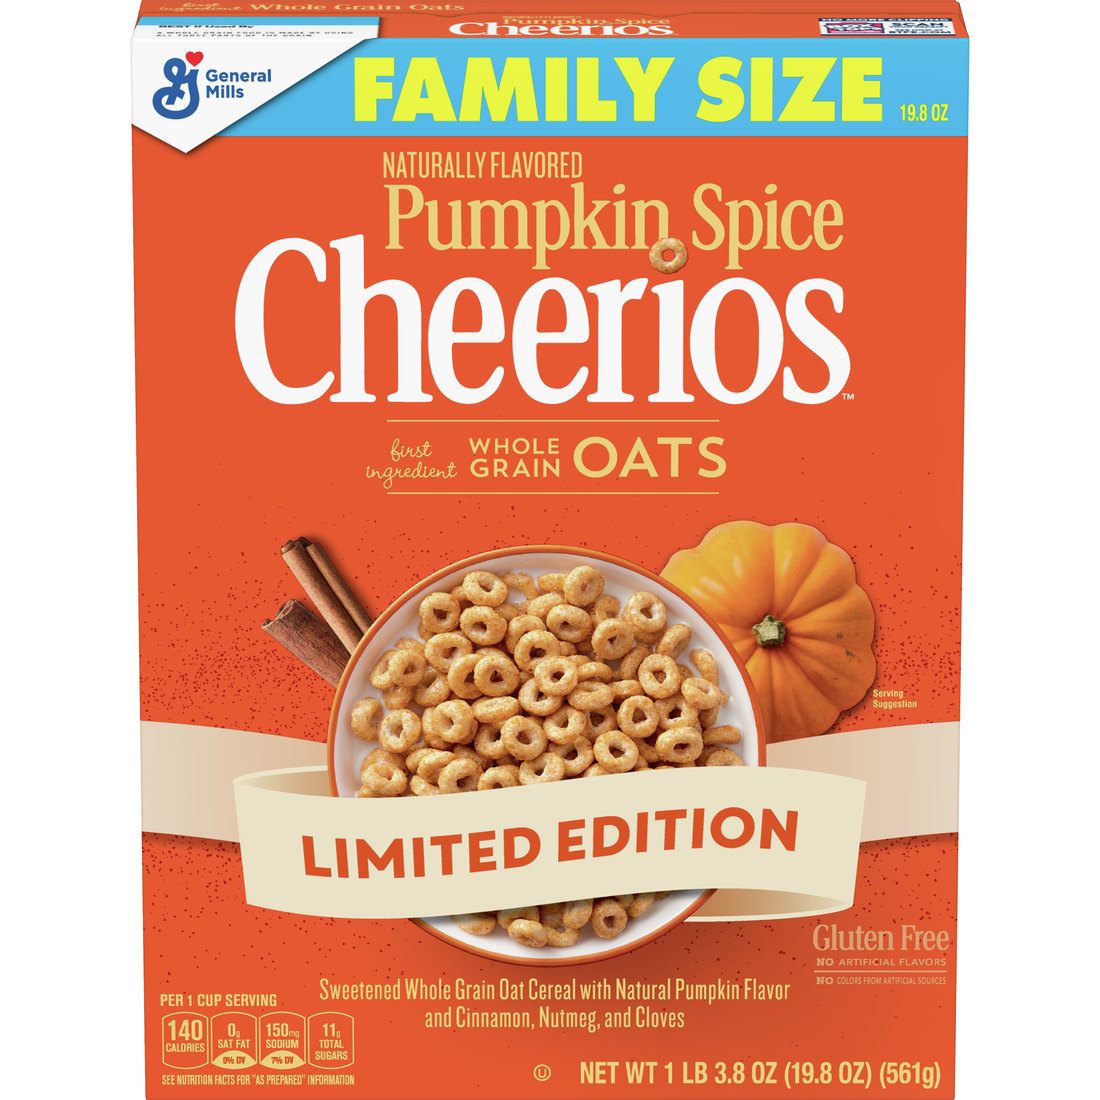 General Mills, Breakfast Cereal, Pumpkin Spice Cheerios, Gluten Free, Family Size, 19.8oz Box - image 2 of 11